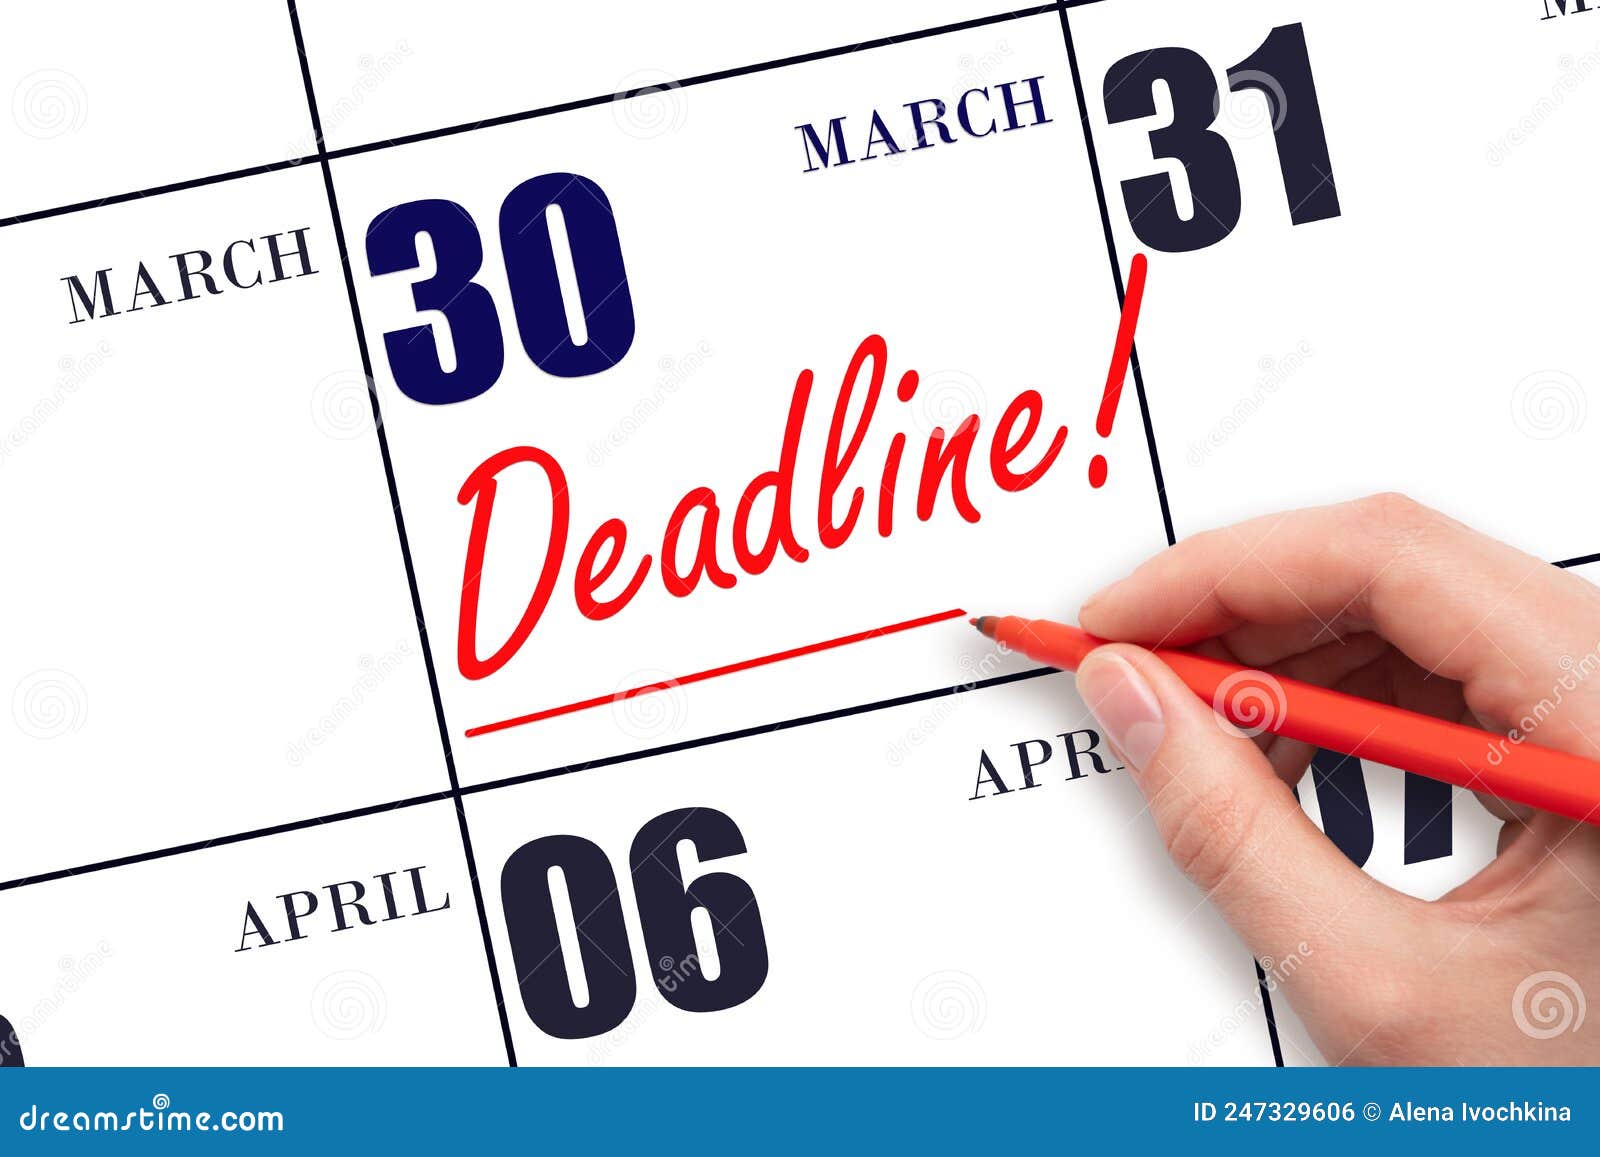 Hand Drawing Red Line and Writing the Text Deadline on Calendar Date